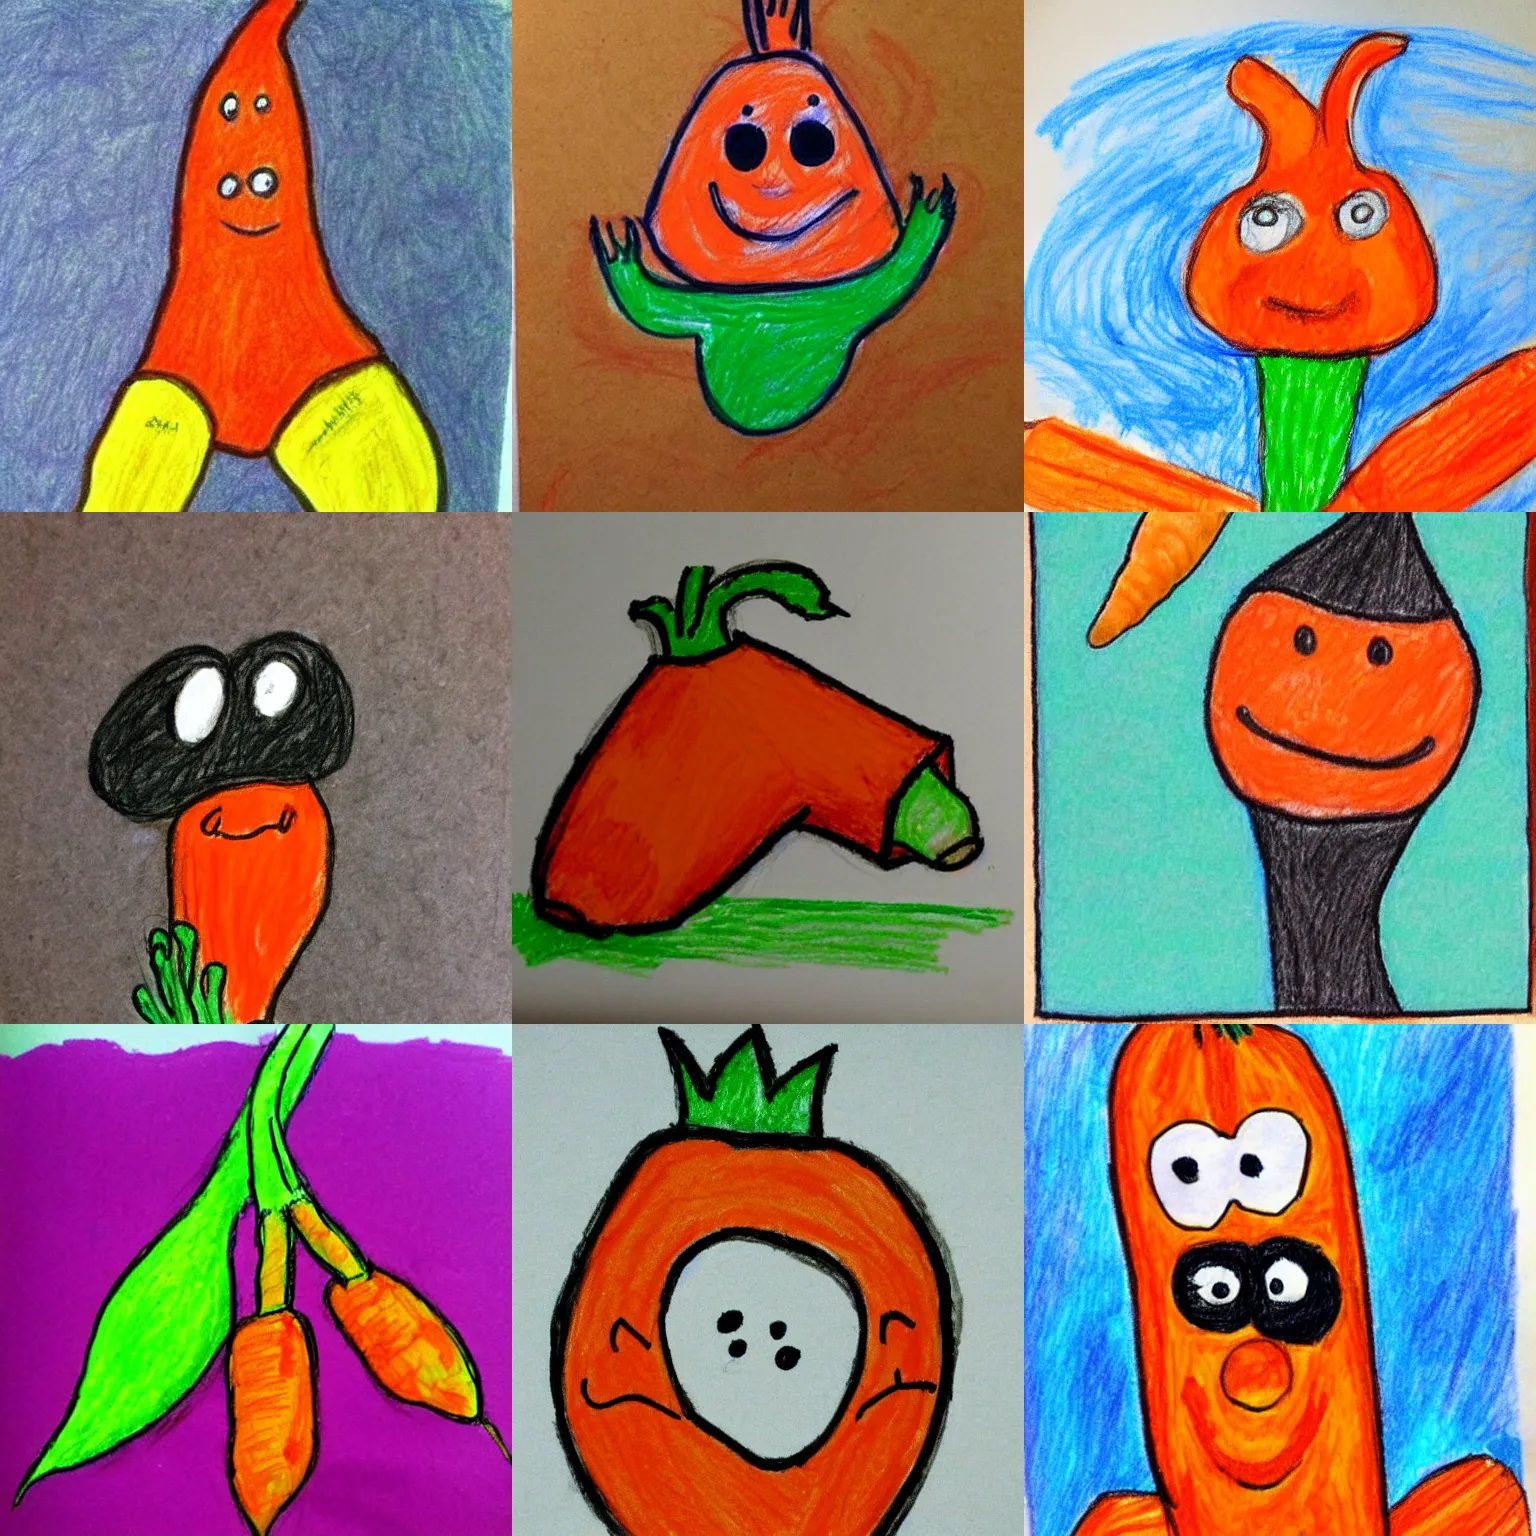 Prompt: children's crayon drawing of a carrot that is scary.